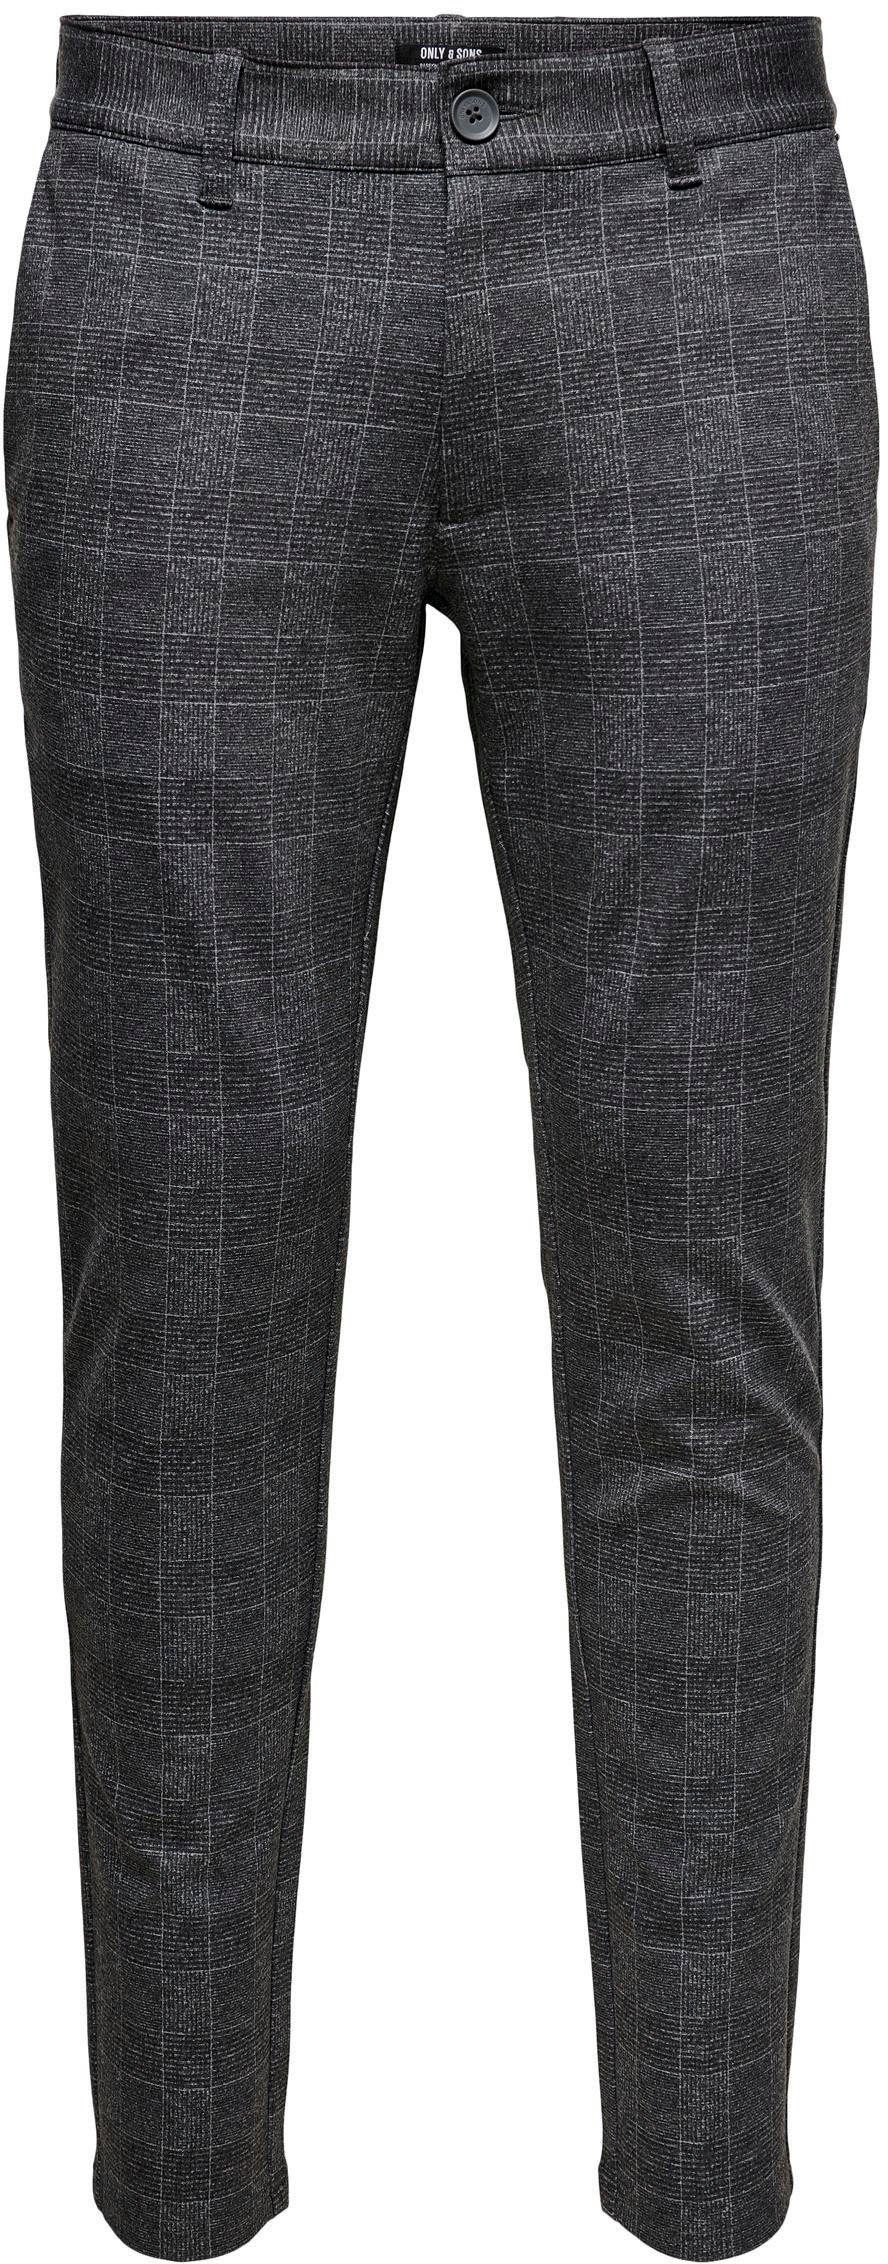 ONLY & PANTS MARK CHECK schwarz-kariert SONS Chinohose